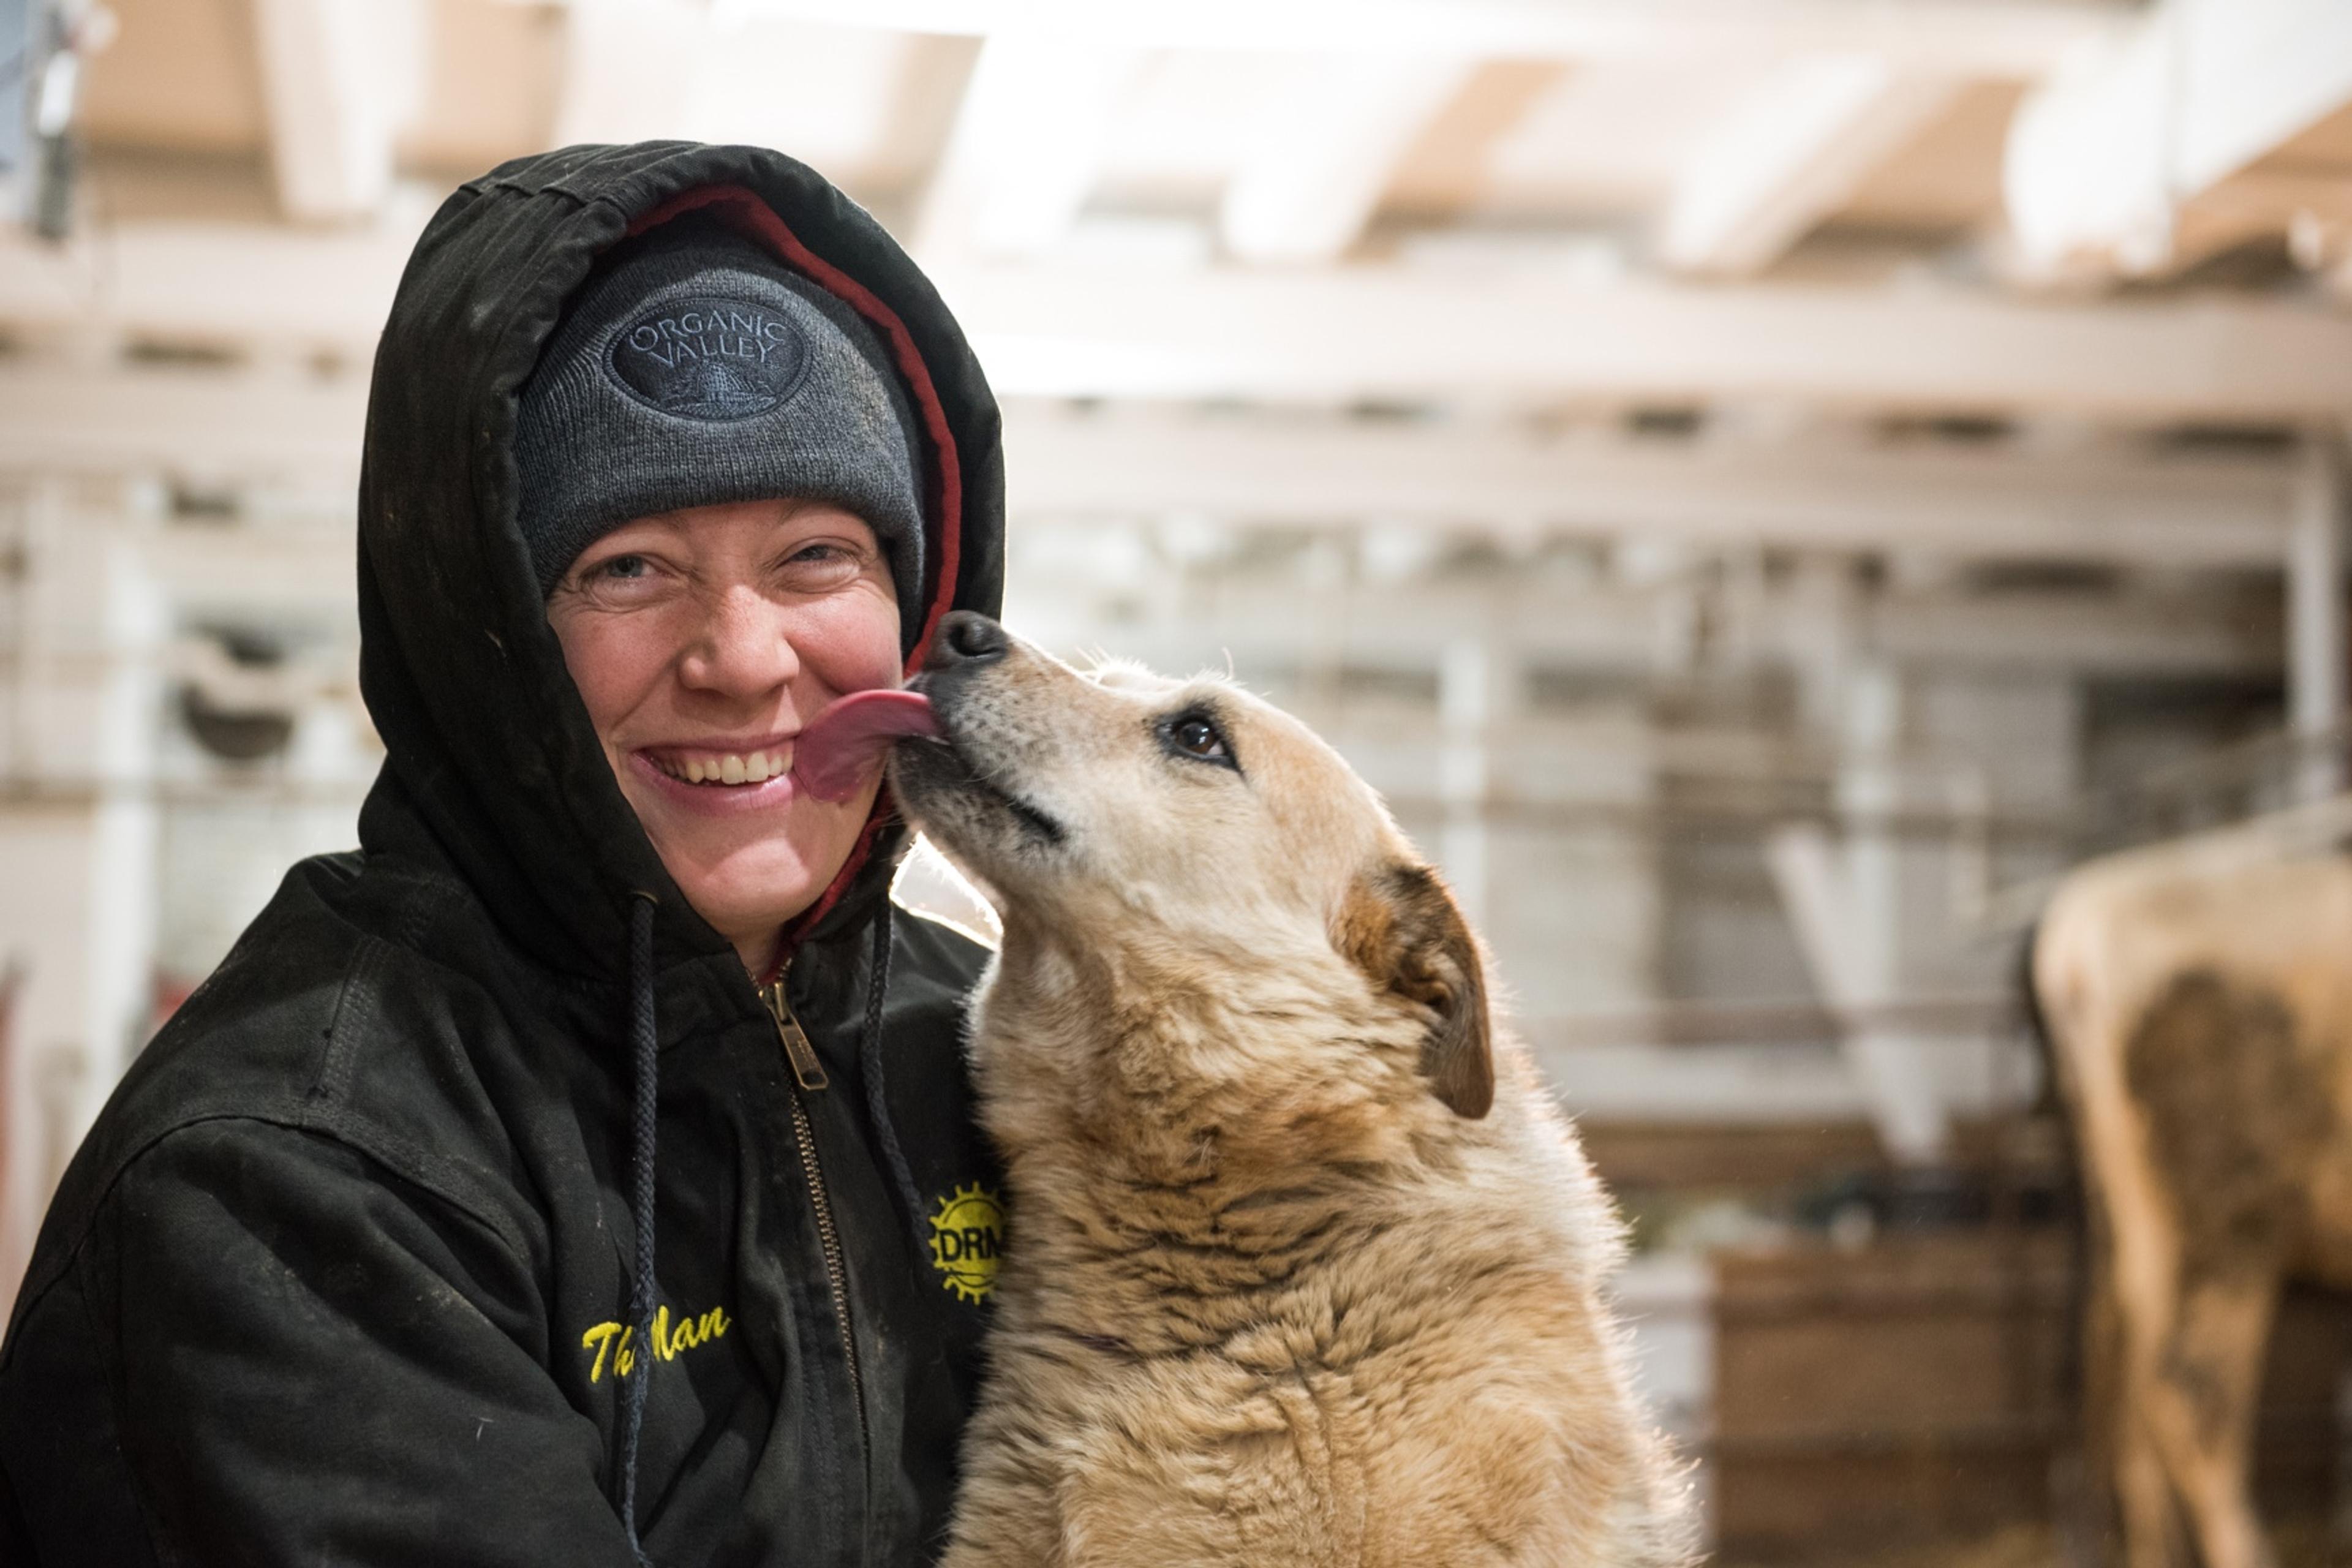 In the milking barn, Amy smiles while her dog licks her face.